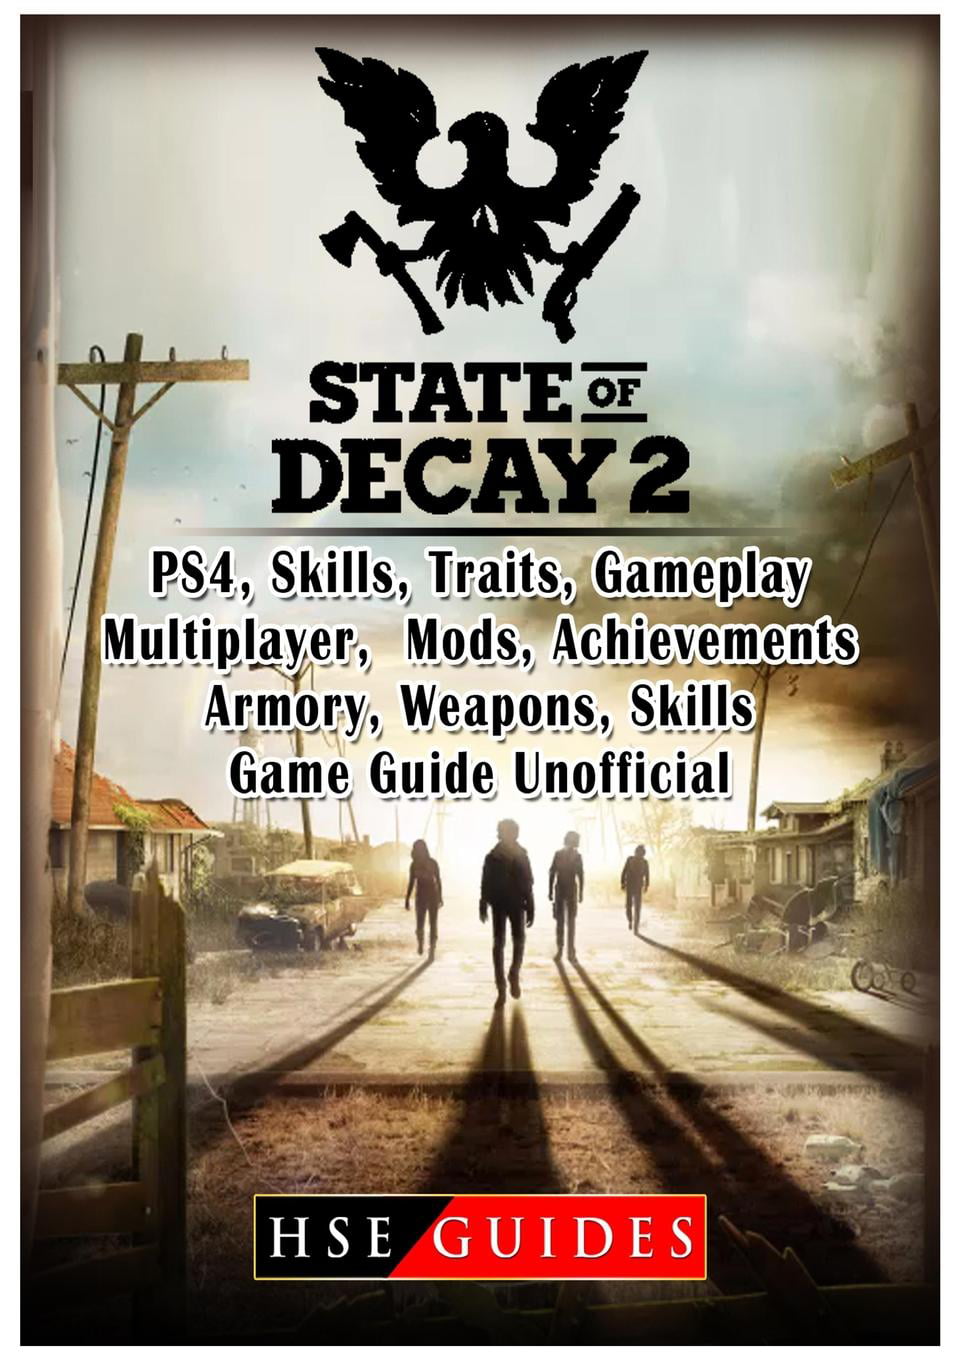 State of Decay 2 PS4, Skills, Traits, Gameplay, Multiplayer, Mods,  Achievements, Armory, Weapons, Skills, Game Guide Unofficial